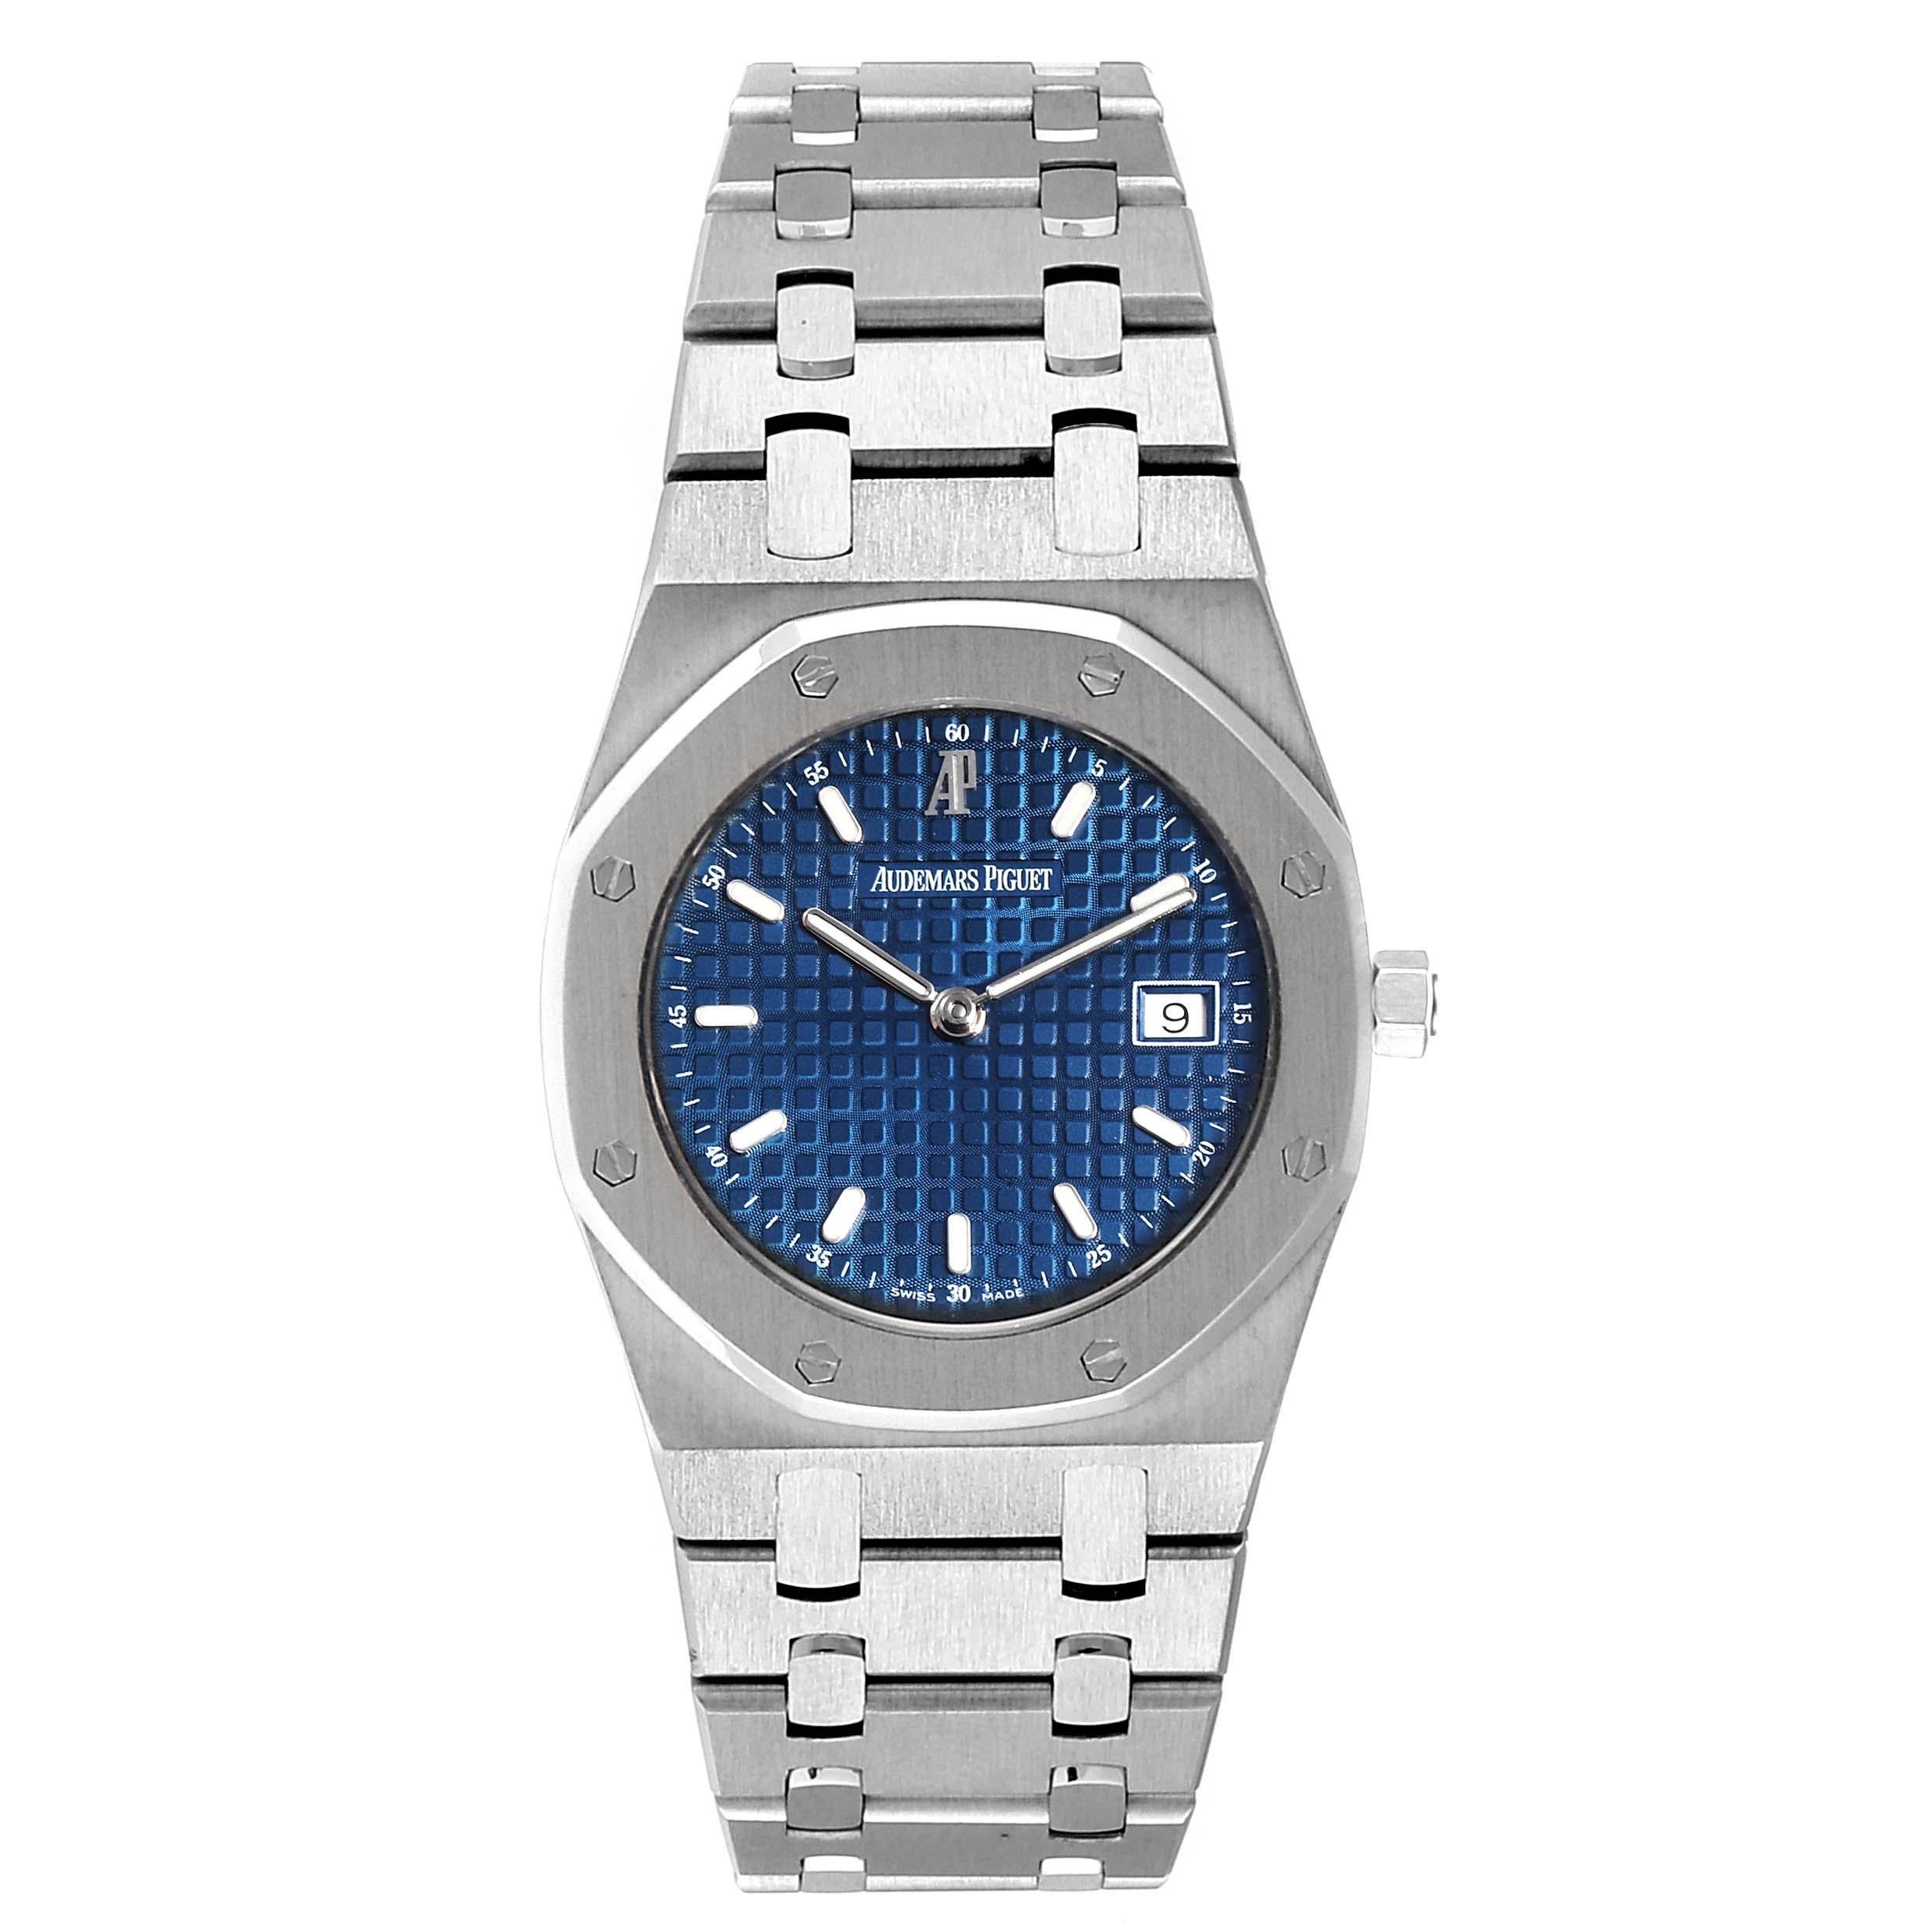 Audemars Piguet Royal Oak 36mm Blue Dial Steel Mens Watch 57175ST. Quartz movement. Stainless steel case 36.0 mm in diameter. Stainless steel bezel punctuated with 8 signature screws. Scratch resistant sapphire crystal. Blue Tapisserie (waffle